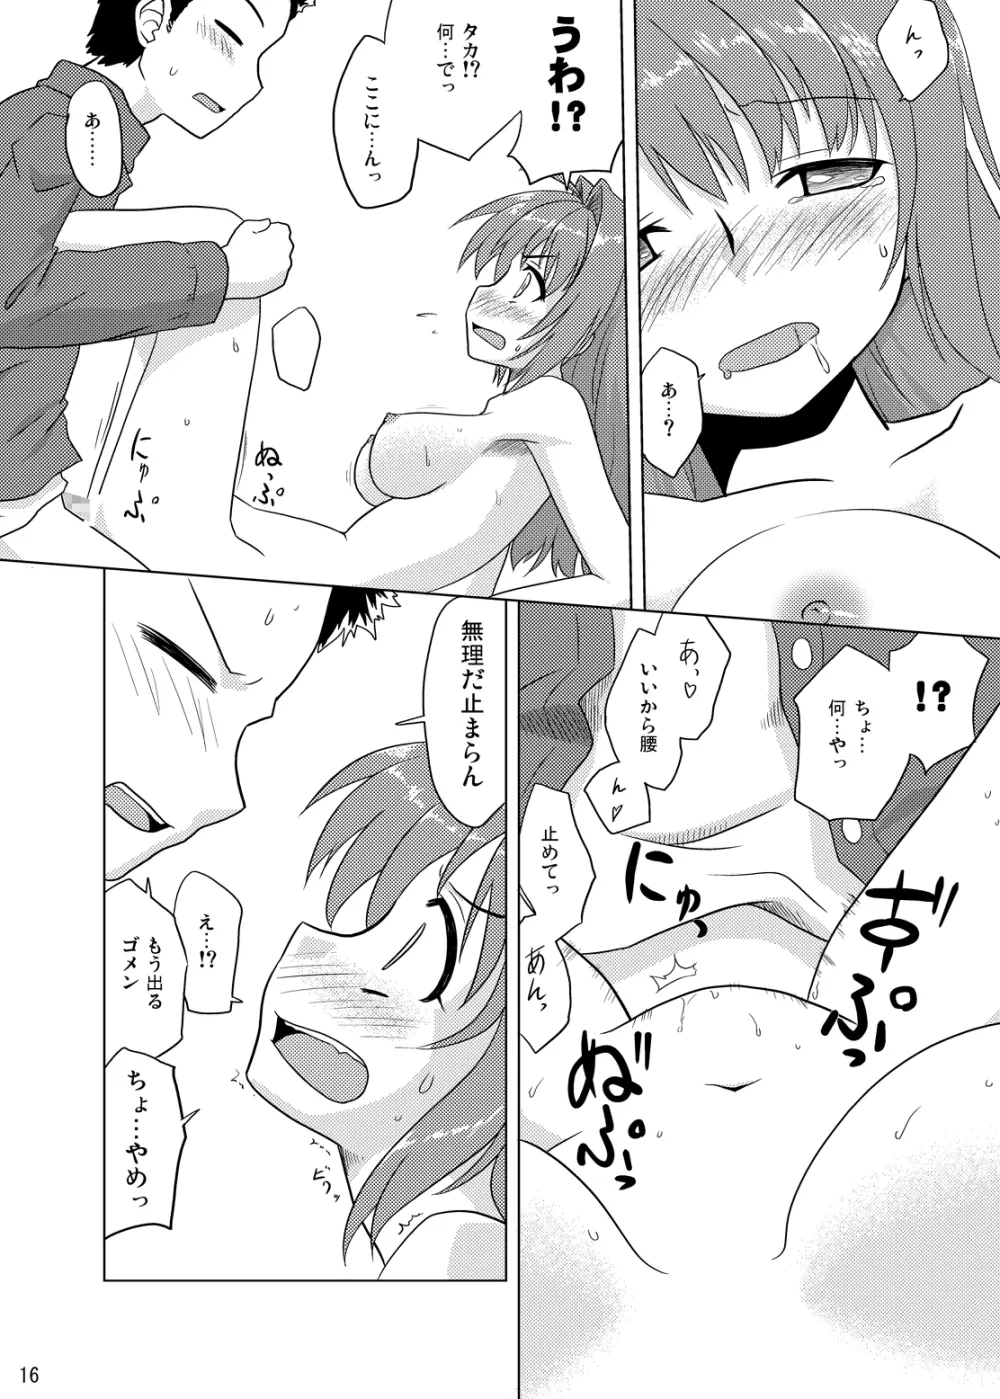 Composition Mix 8 はじマル！6 - page15